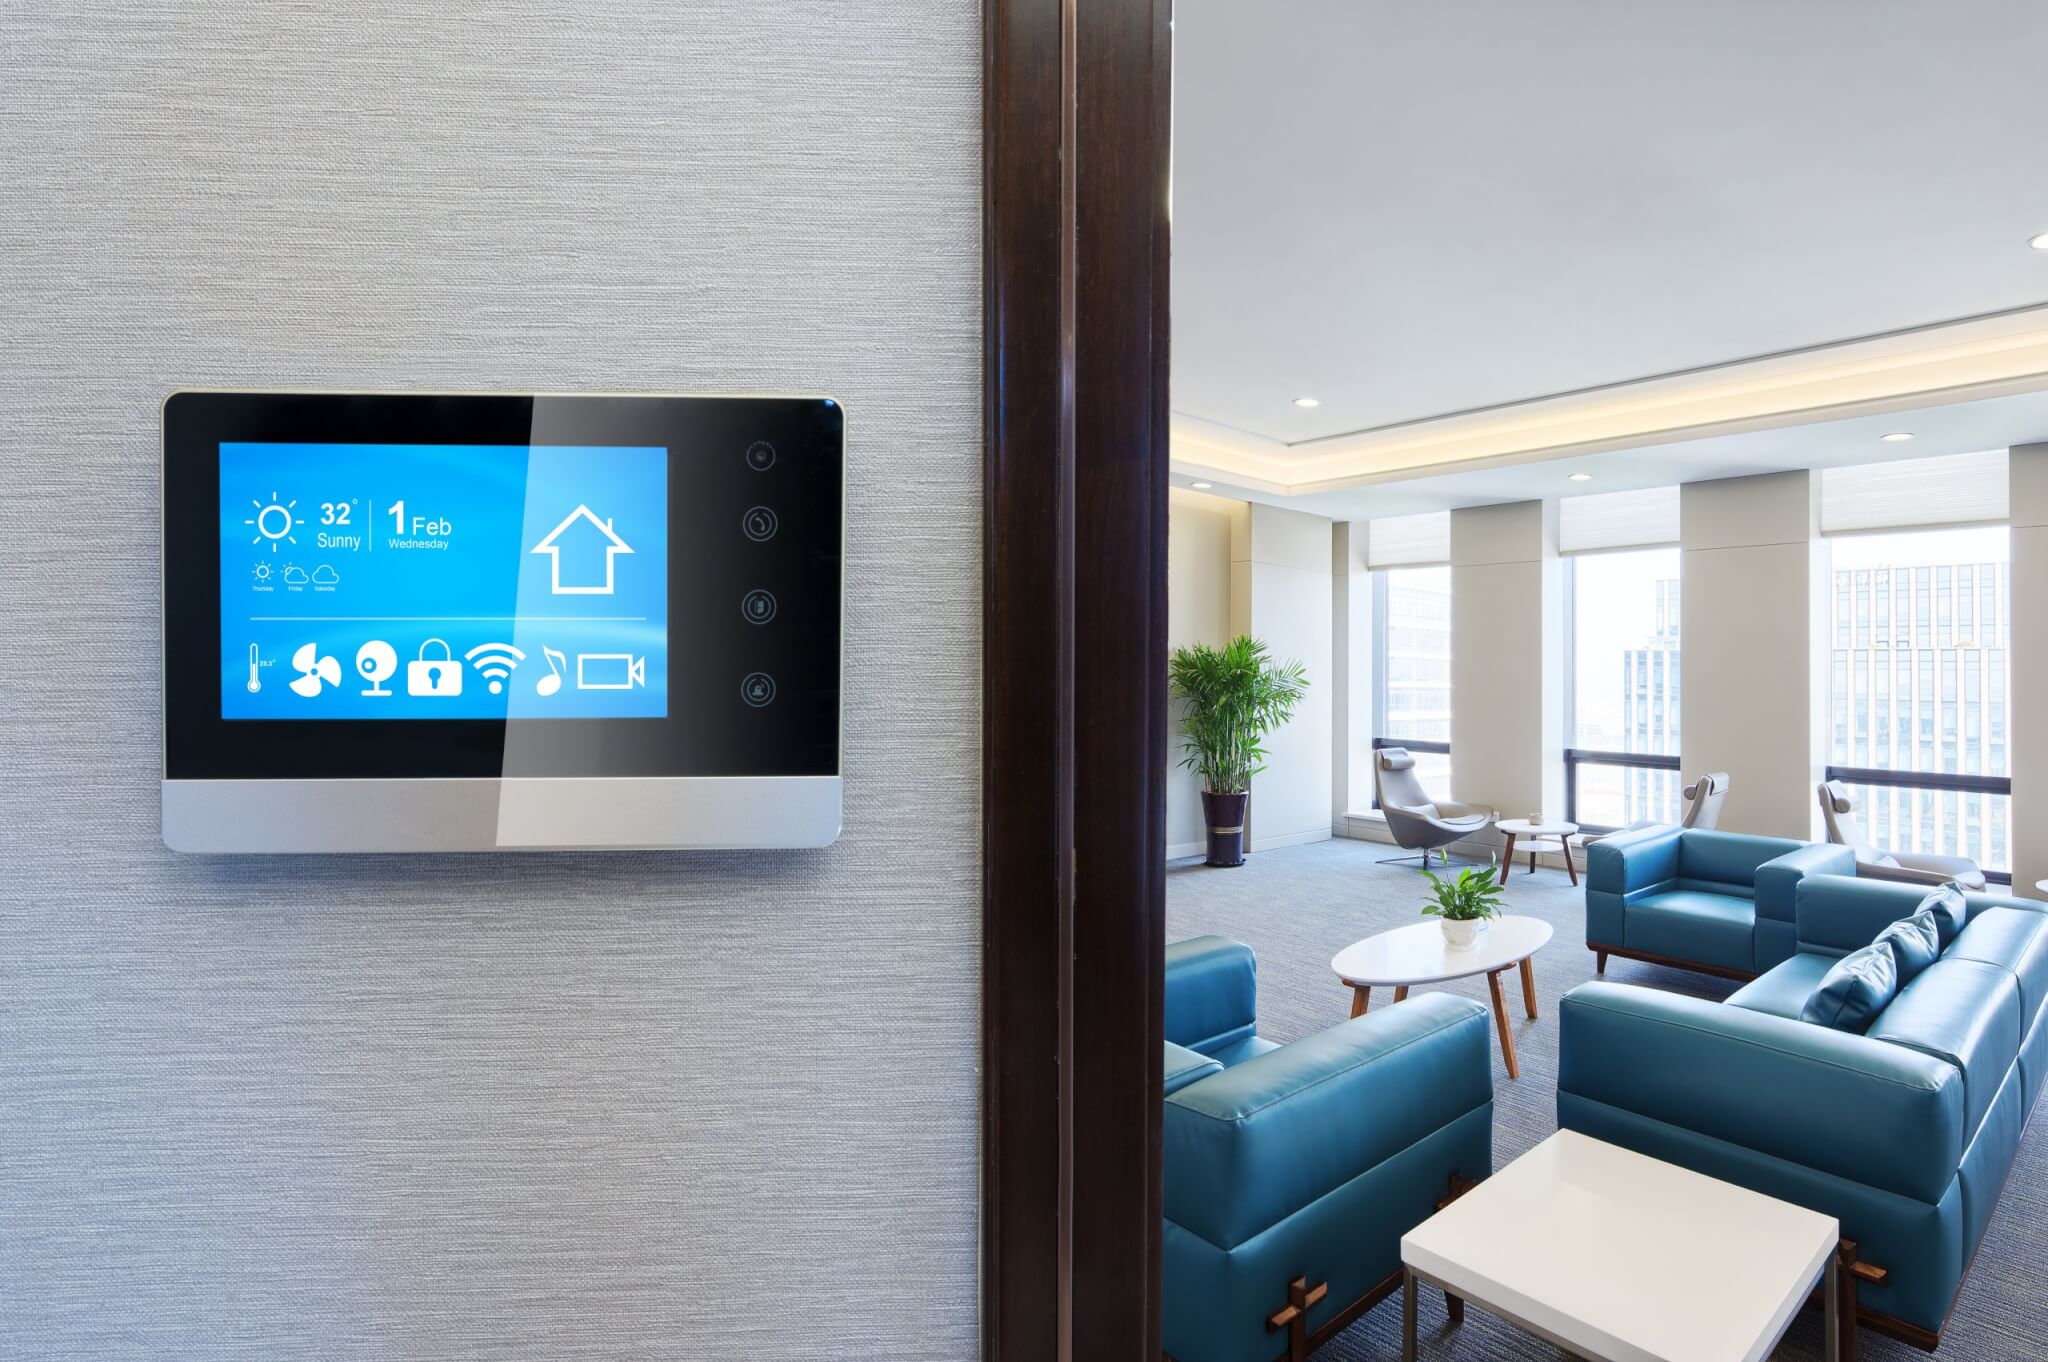 A smart thermostat is a great way to reduce energy and save on costs